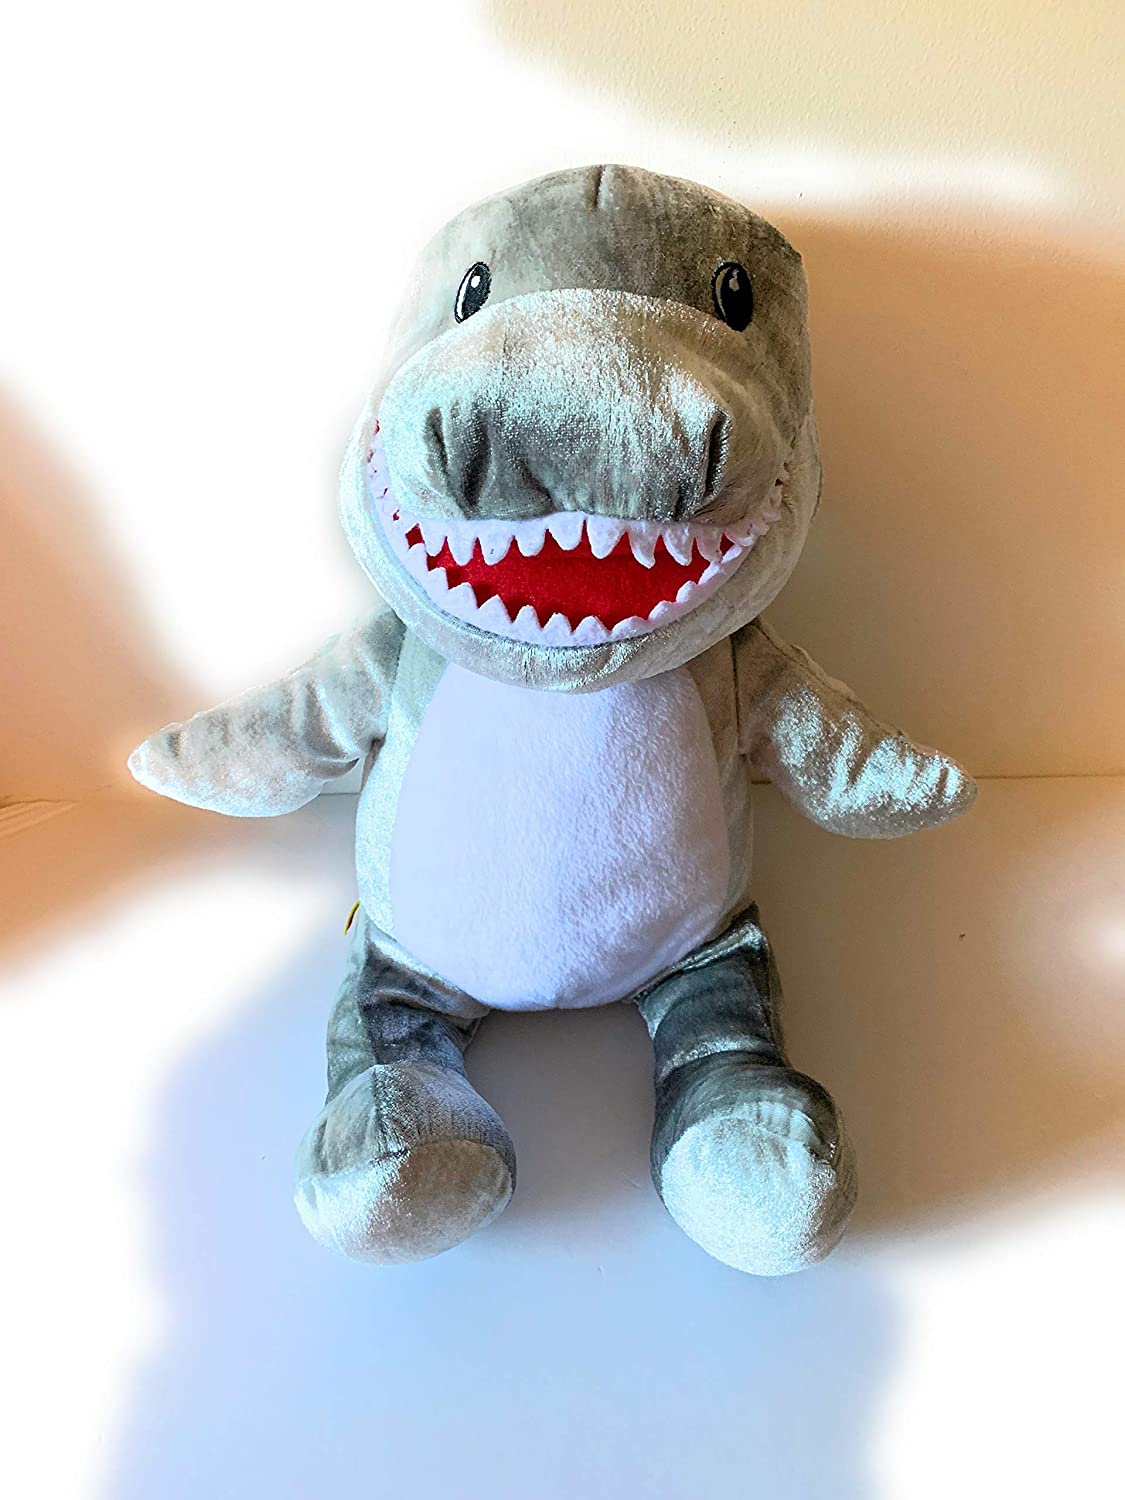 Reap the benefits of Weighted Stuffed Animal For Adults